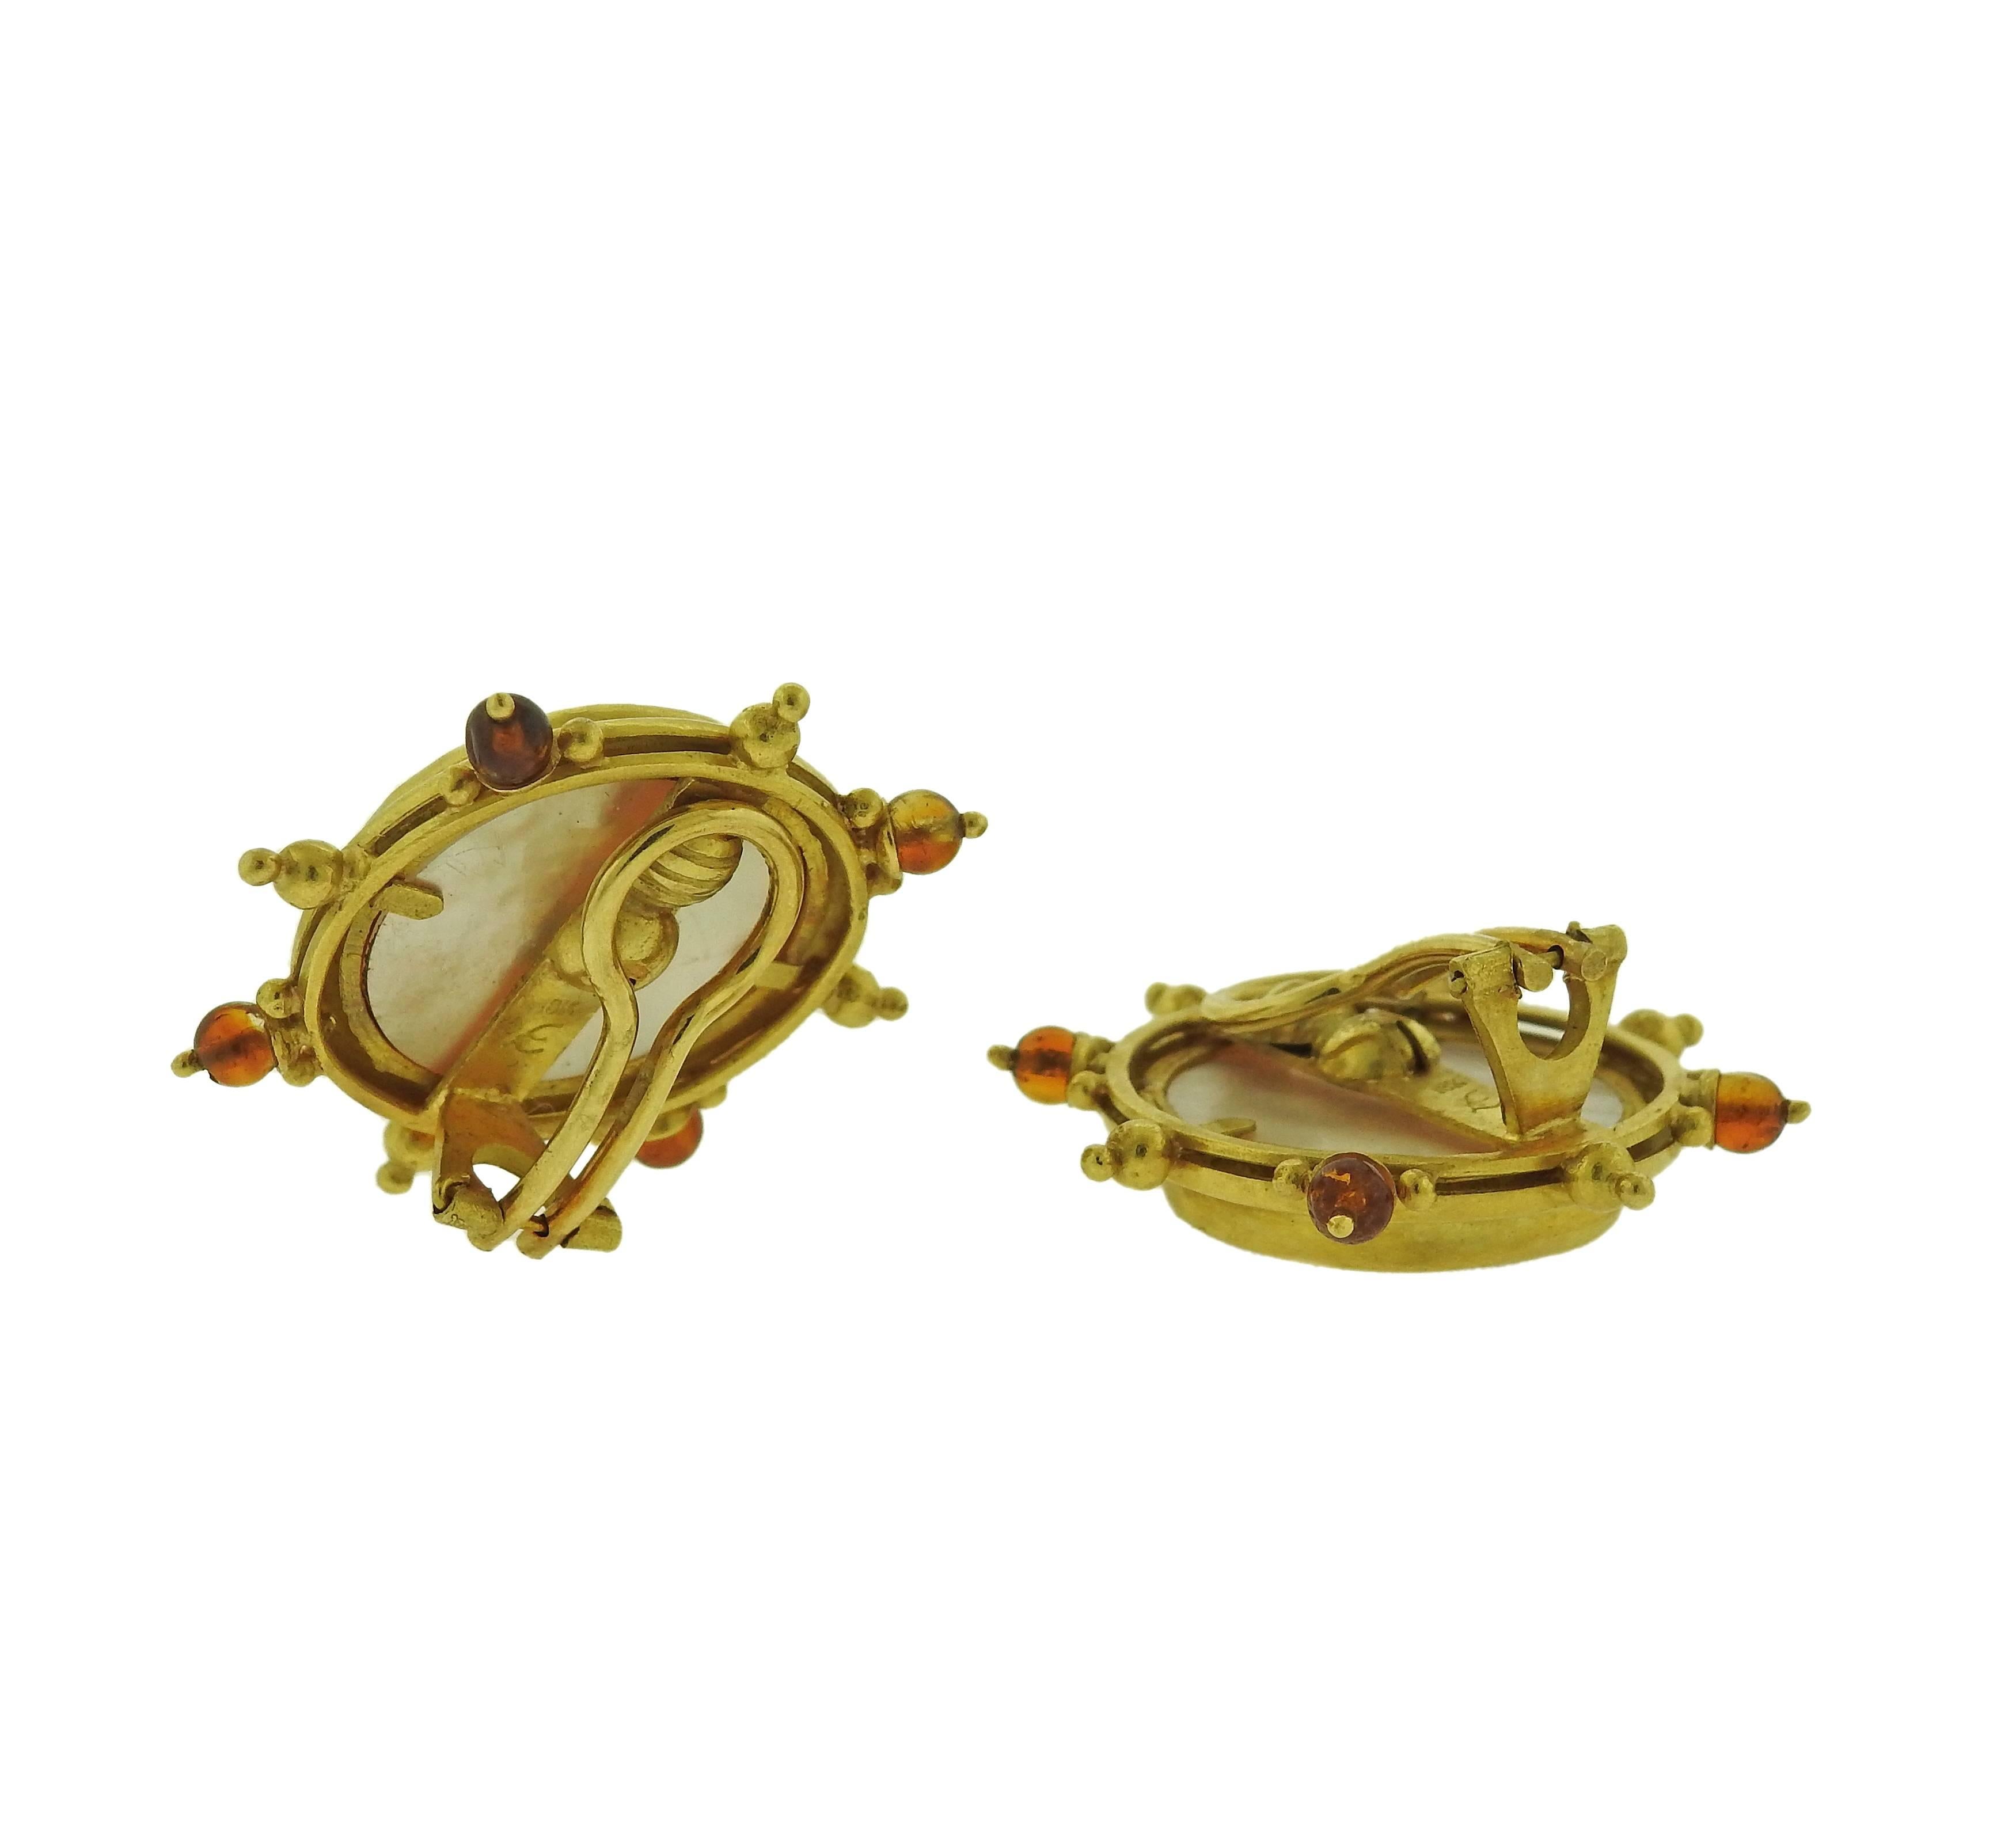 Pair of large 18k yellow gold earrings, crafted by Elizabeth Locke, set with Venetian glass intaglio, backed with mother of pearl, and citrines. Earrings are 35mm x 36mm, collapsible posts. Marked: 18k, Locke E mark. Weight - 26.7 grams 